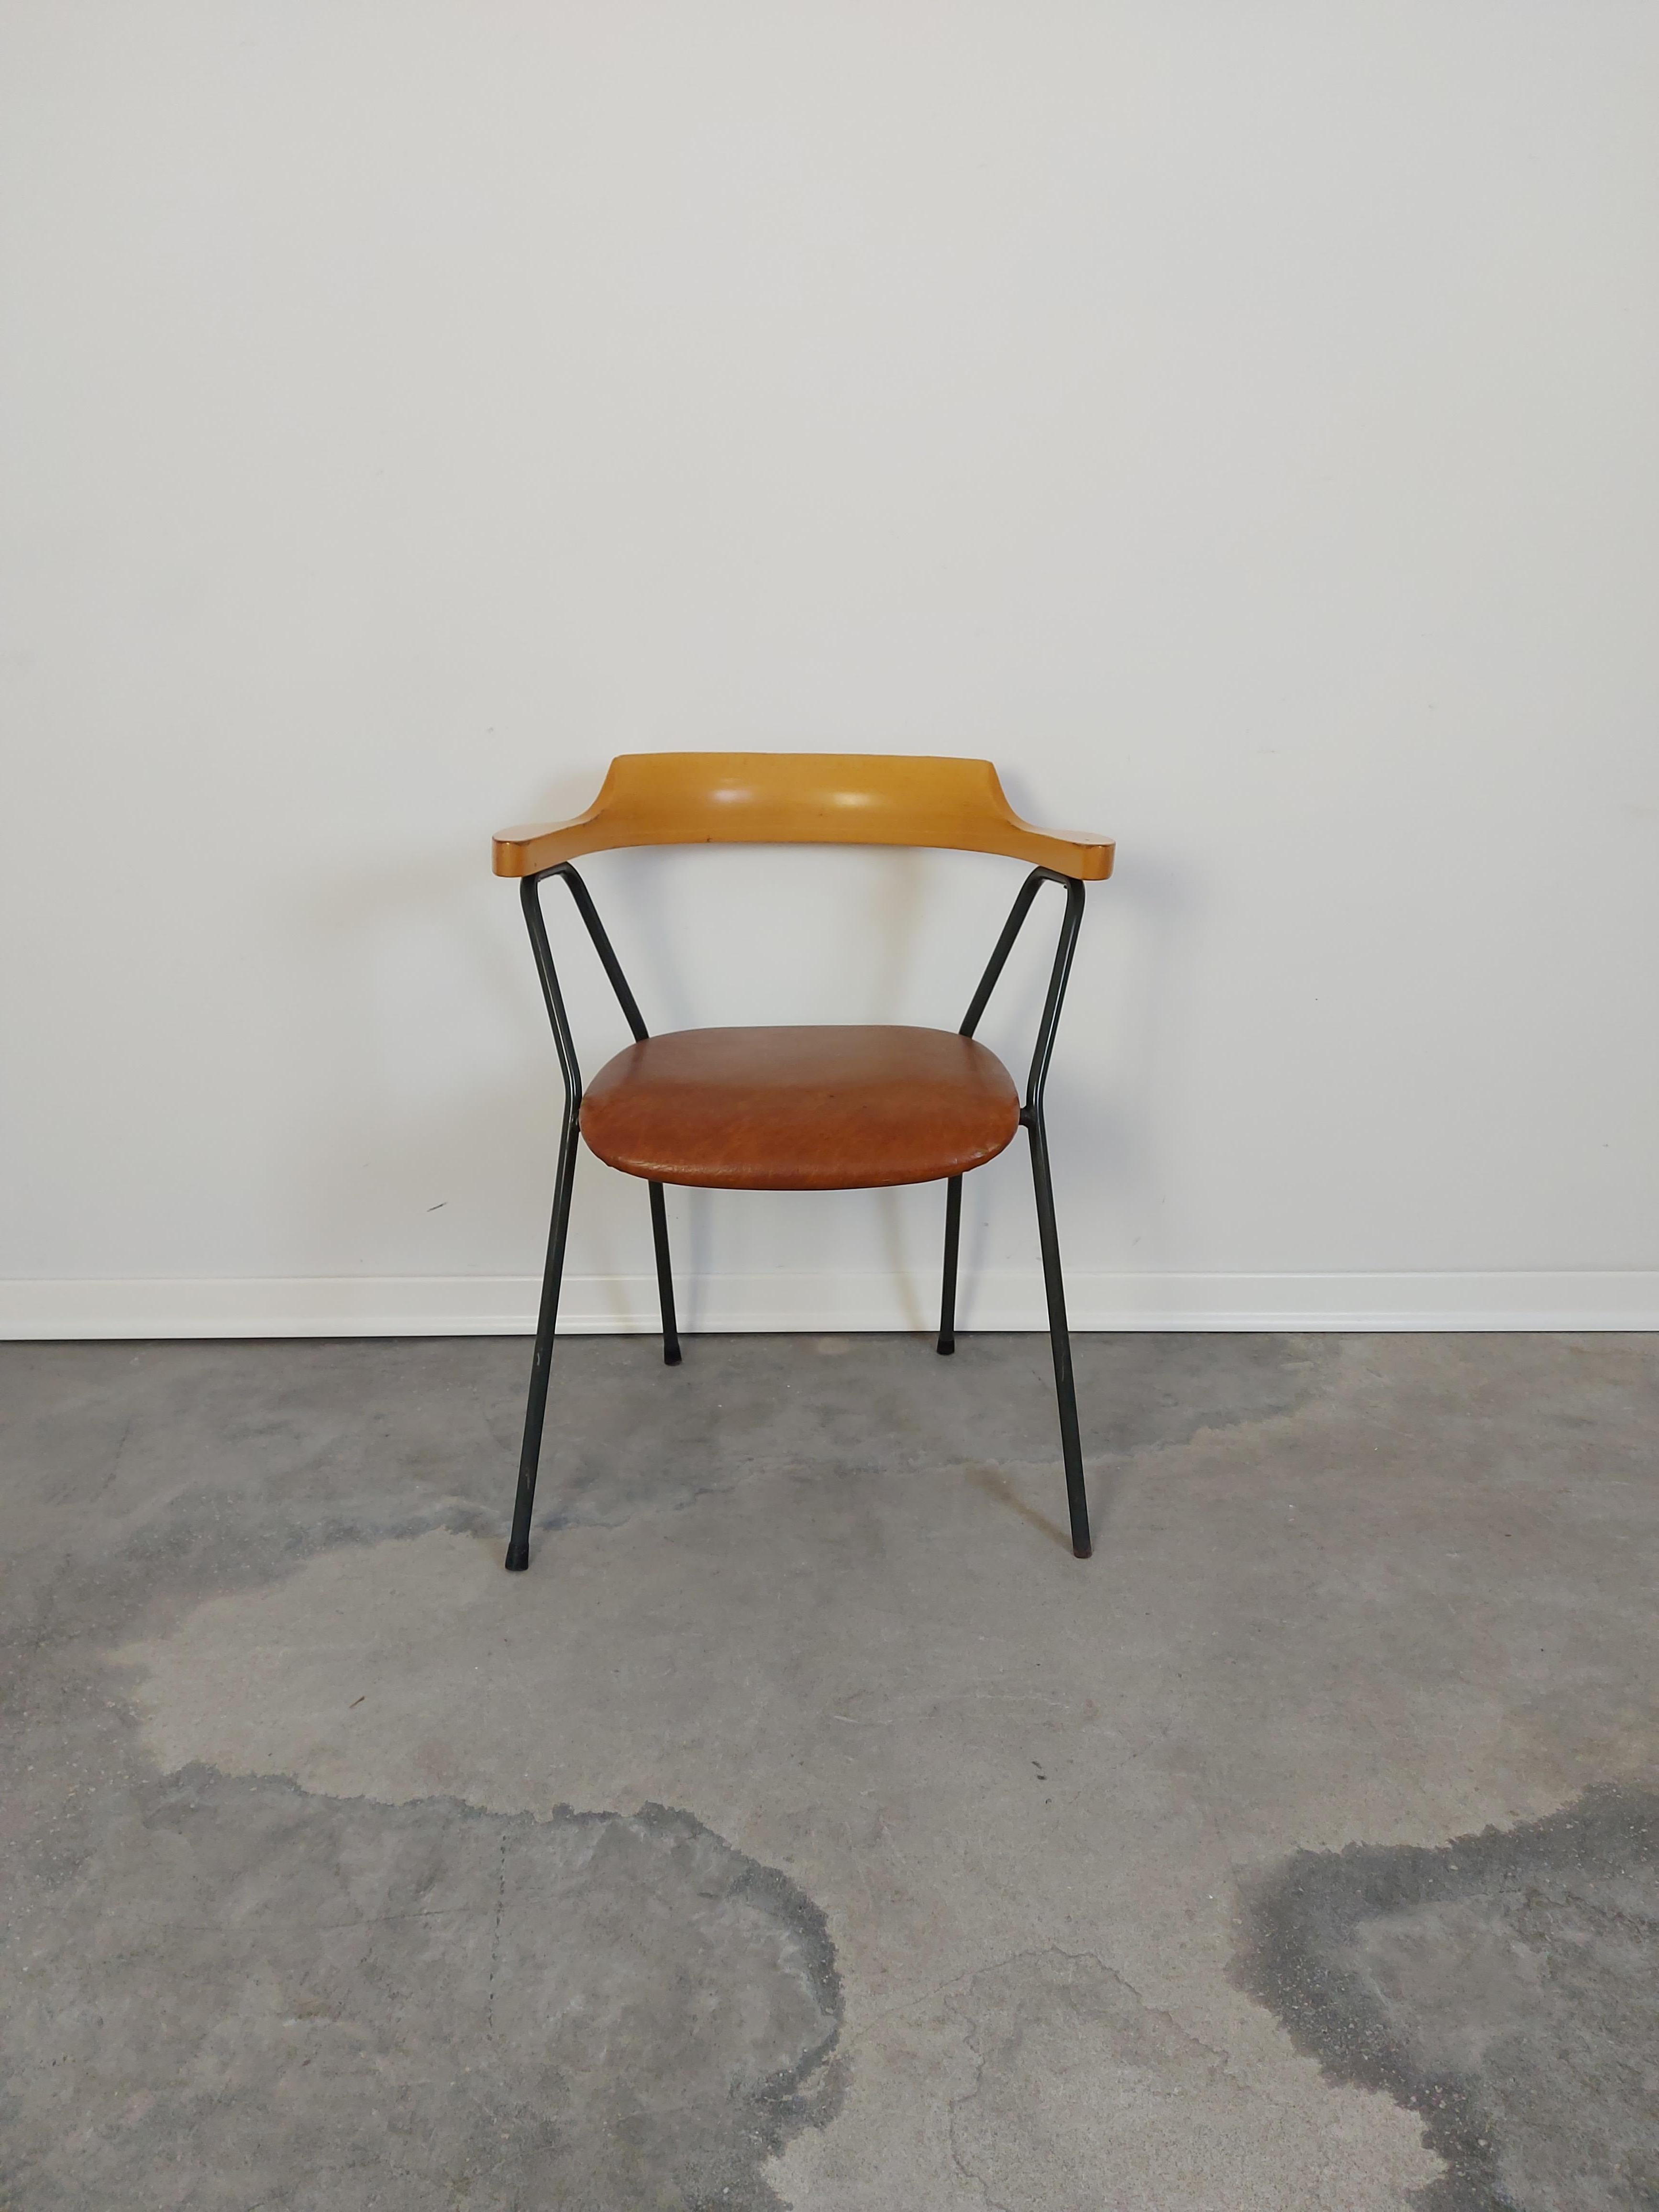 Armrest chair Model 4455 designed by Niko Kralj for Stol Kamnik in 50s. Some signs of use.

Pure minimalism finds its place in every interior. 

It multi folds and has curved beech back with black metal structure.

This chair was produced in